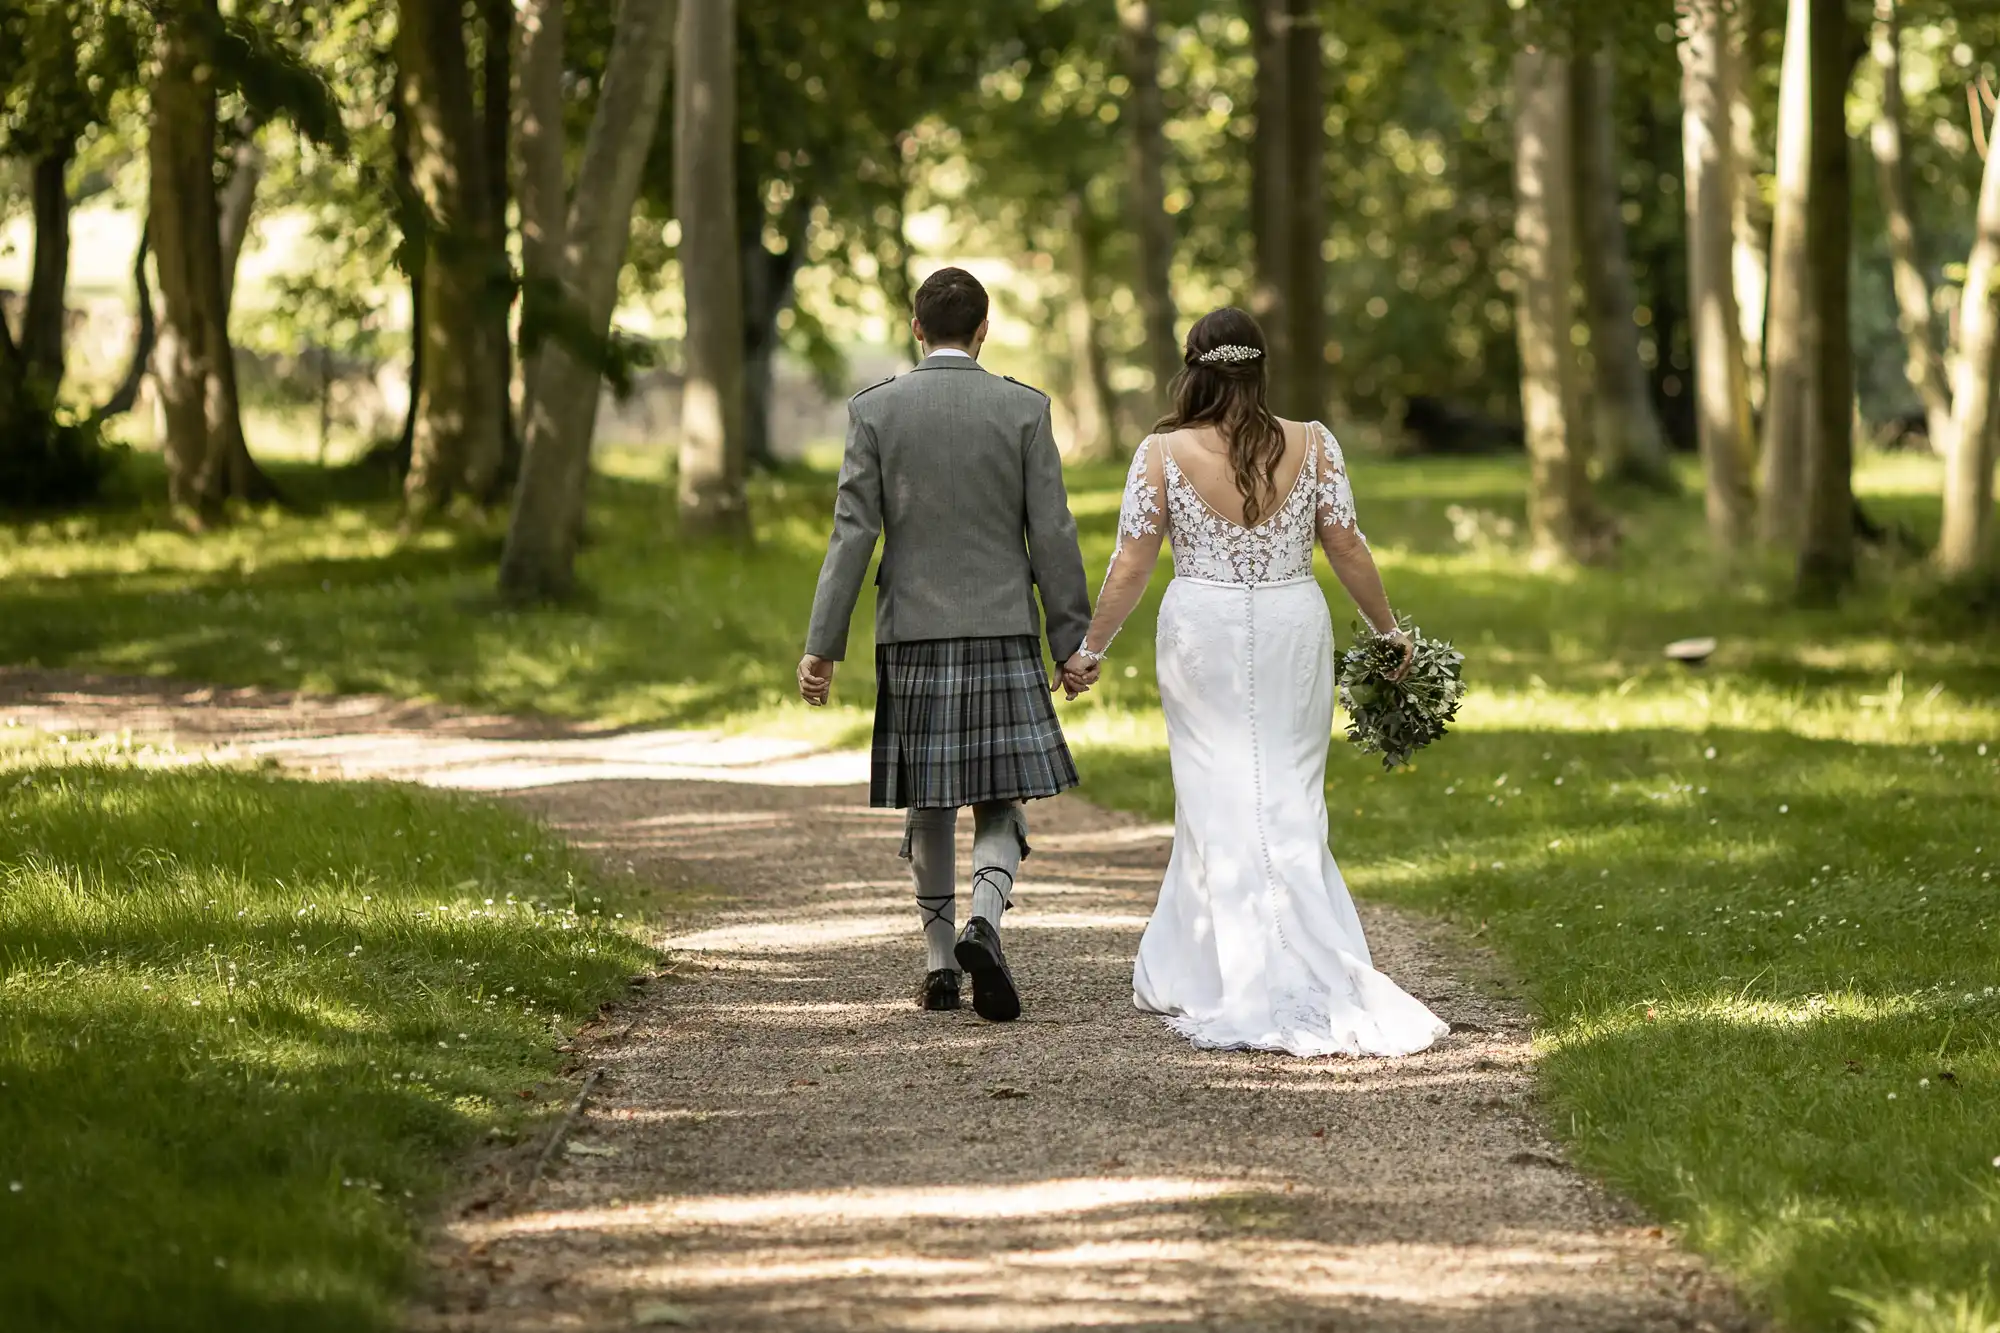 A bride and groom, clad in a white dress and a gray kilt respectively, walk hand in hand down a tree-lined path.